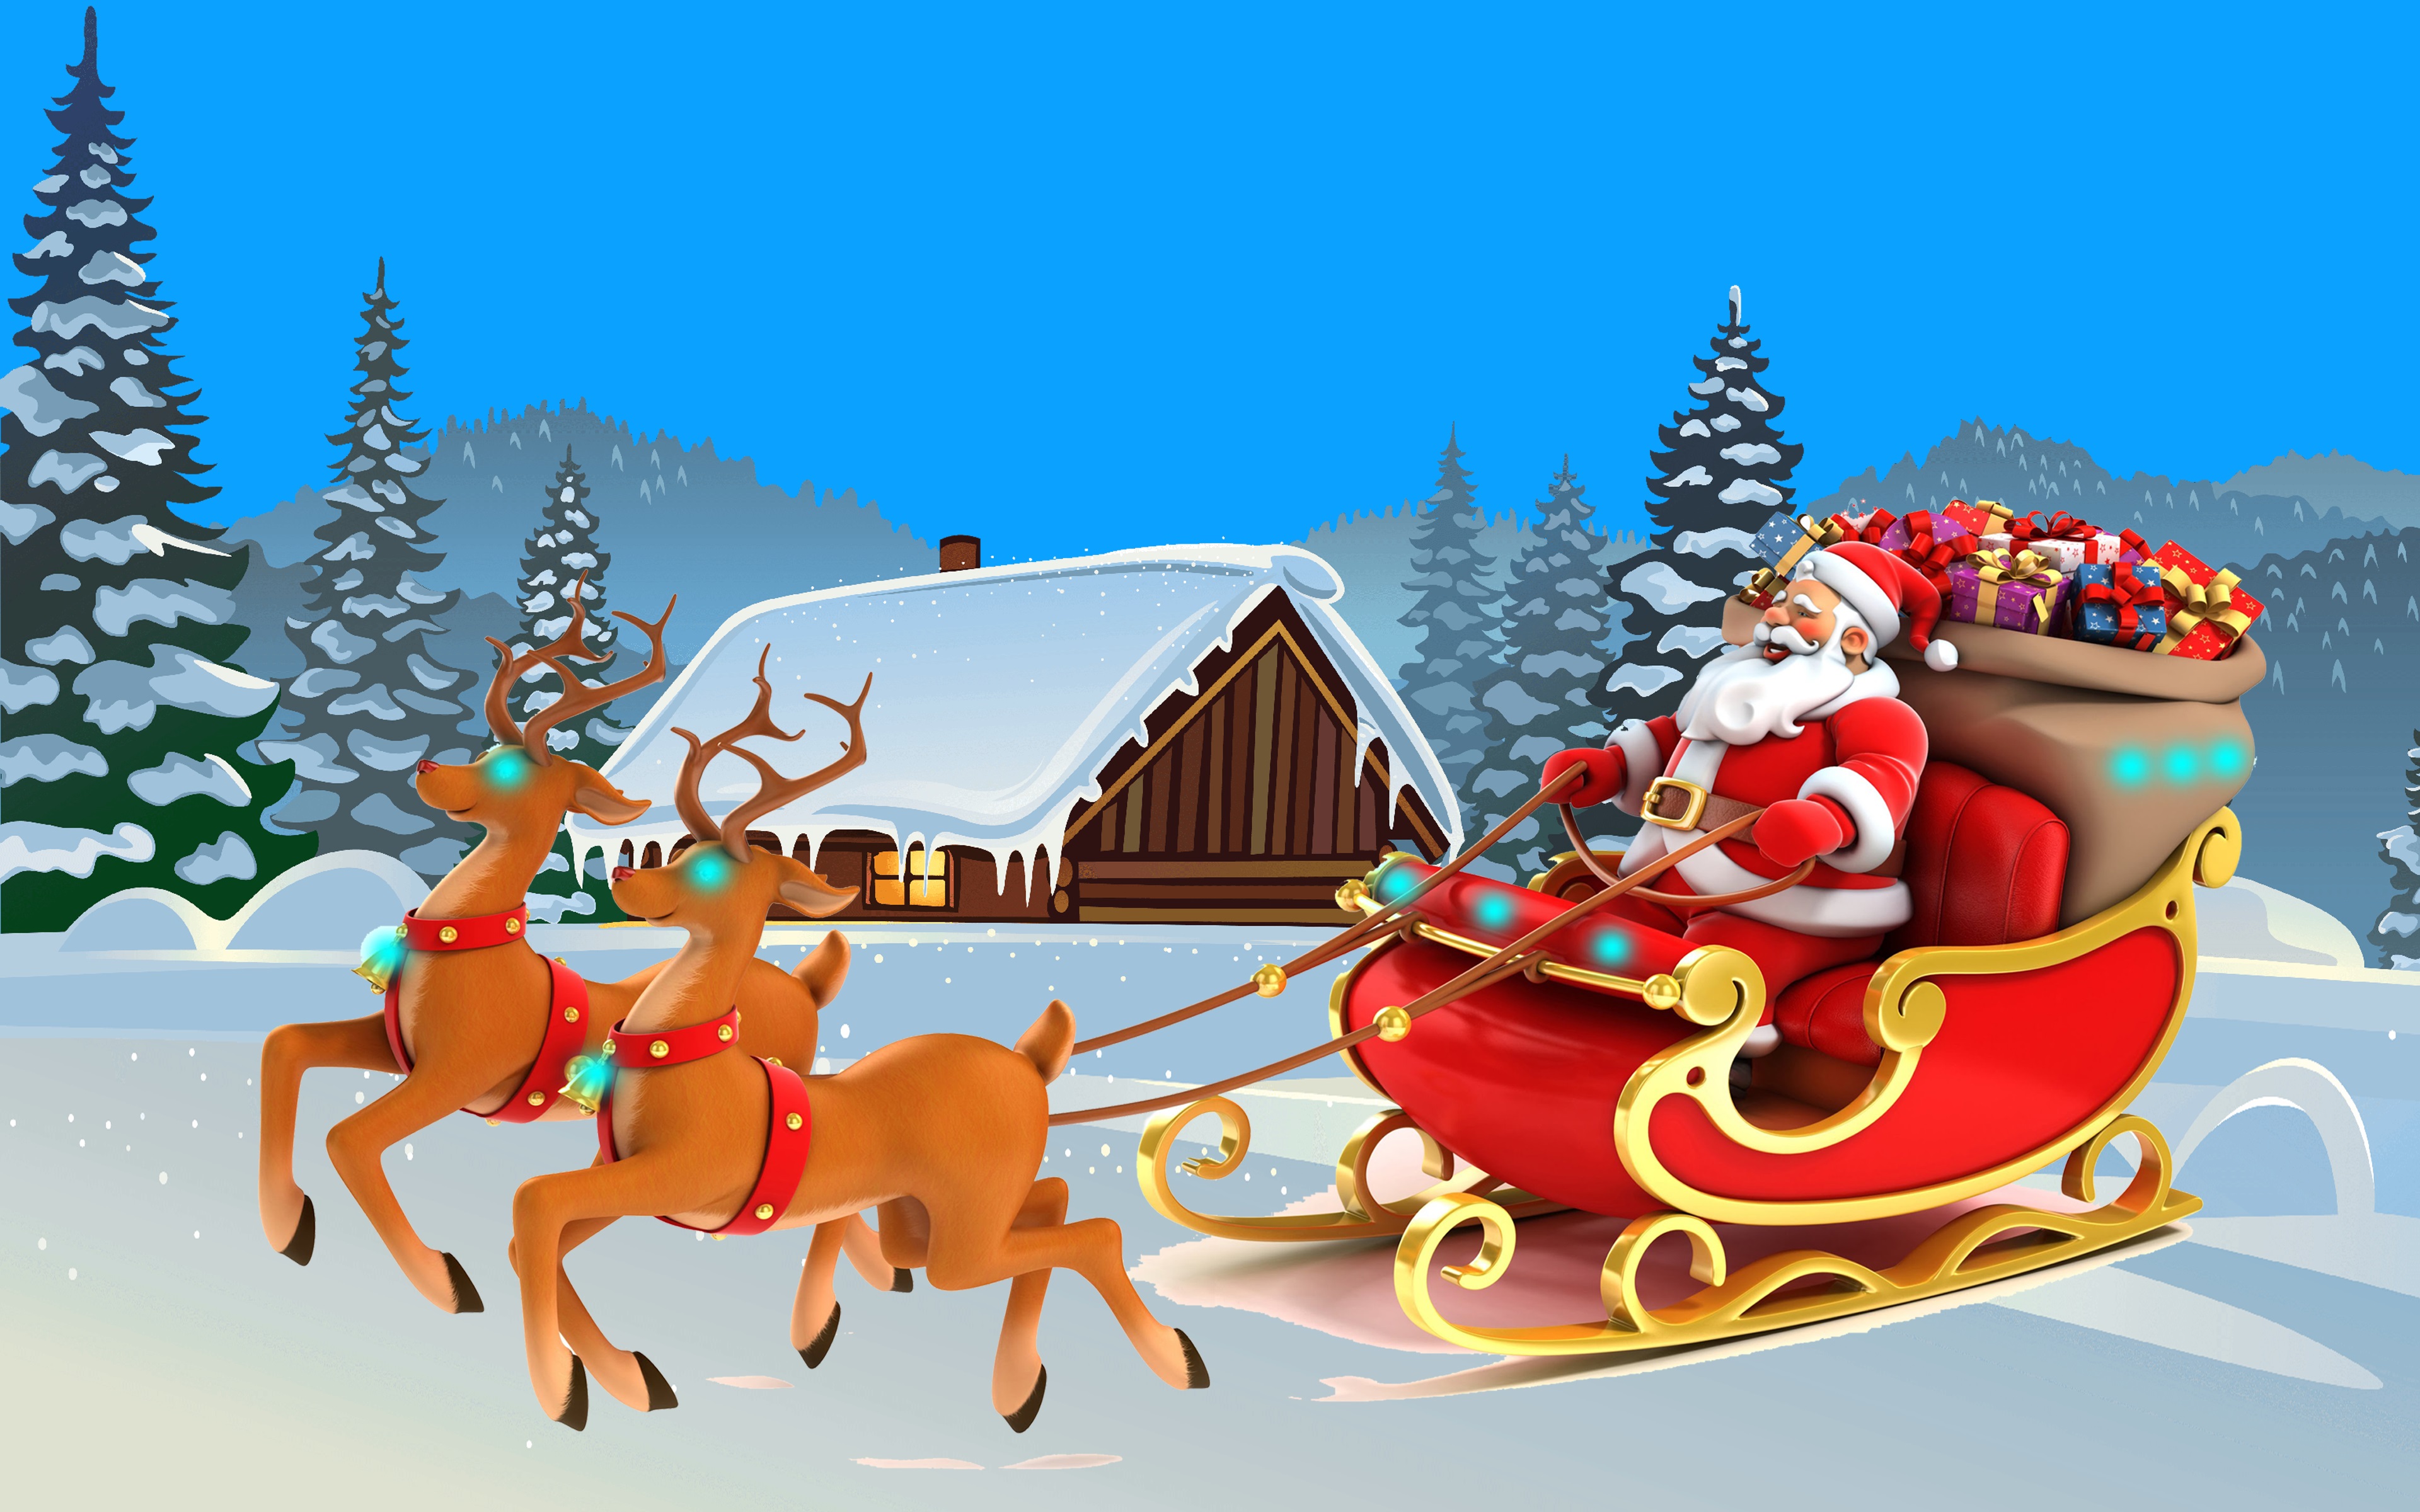 Happy New Year Christmas Card Santa Claus And Lapland 4k Ultra Hd Desktop  Wallpapers For Computers Laptop Tablet And Mobile Phones 3840x2400 :  